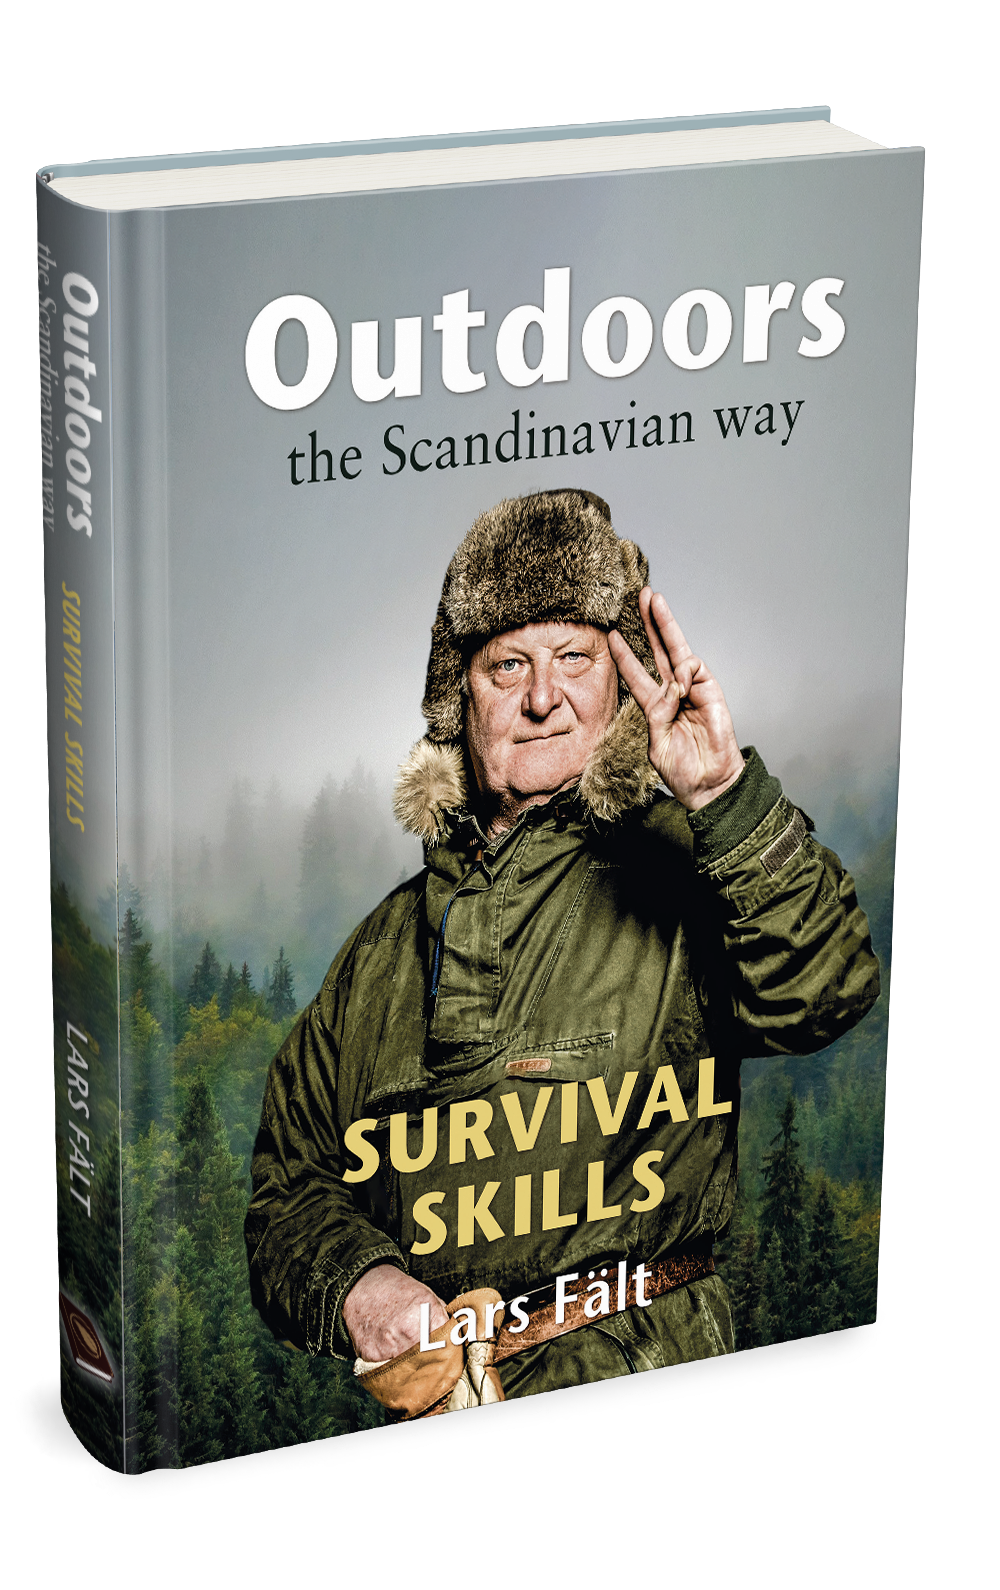 Outdoors the Scandinavian Way - Survival Skills  front cover of book